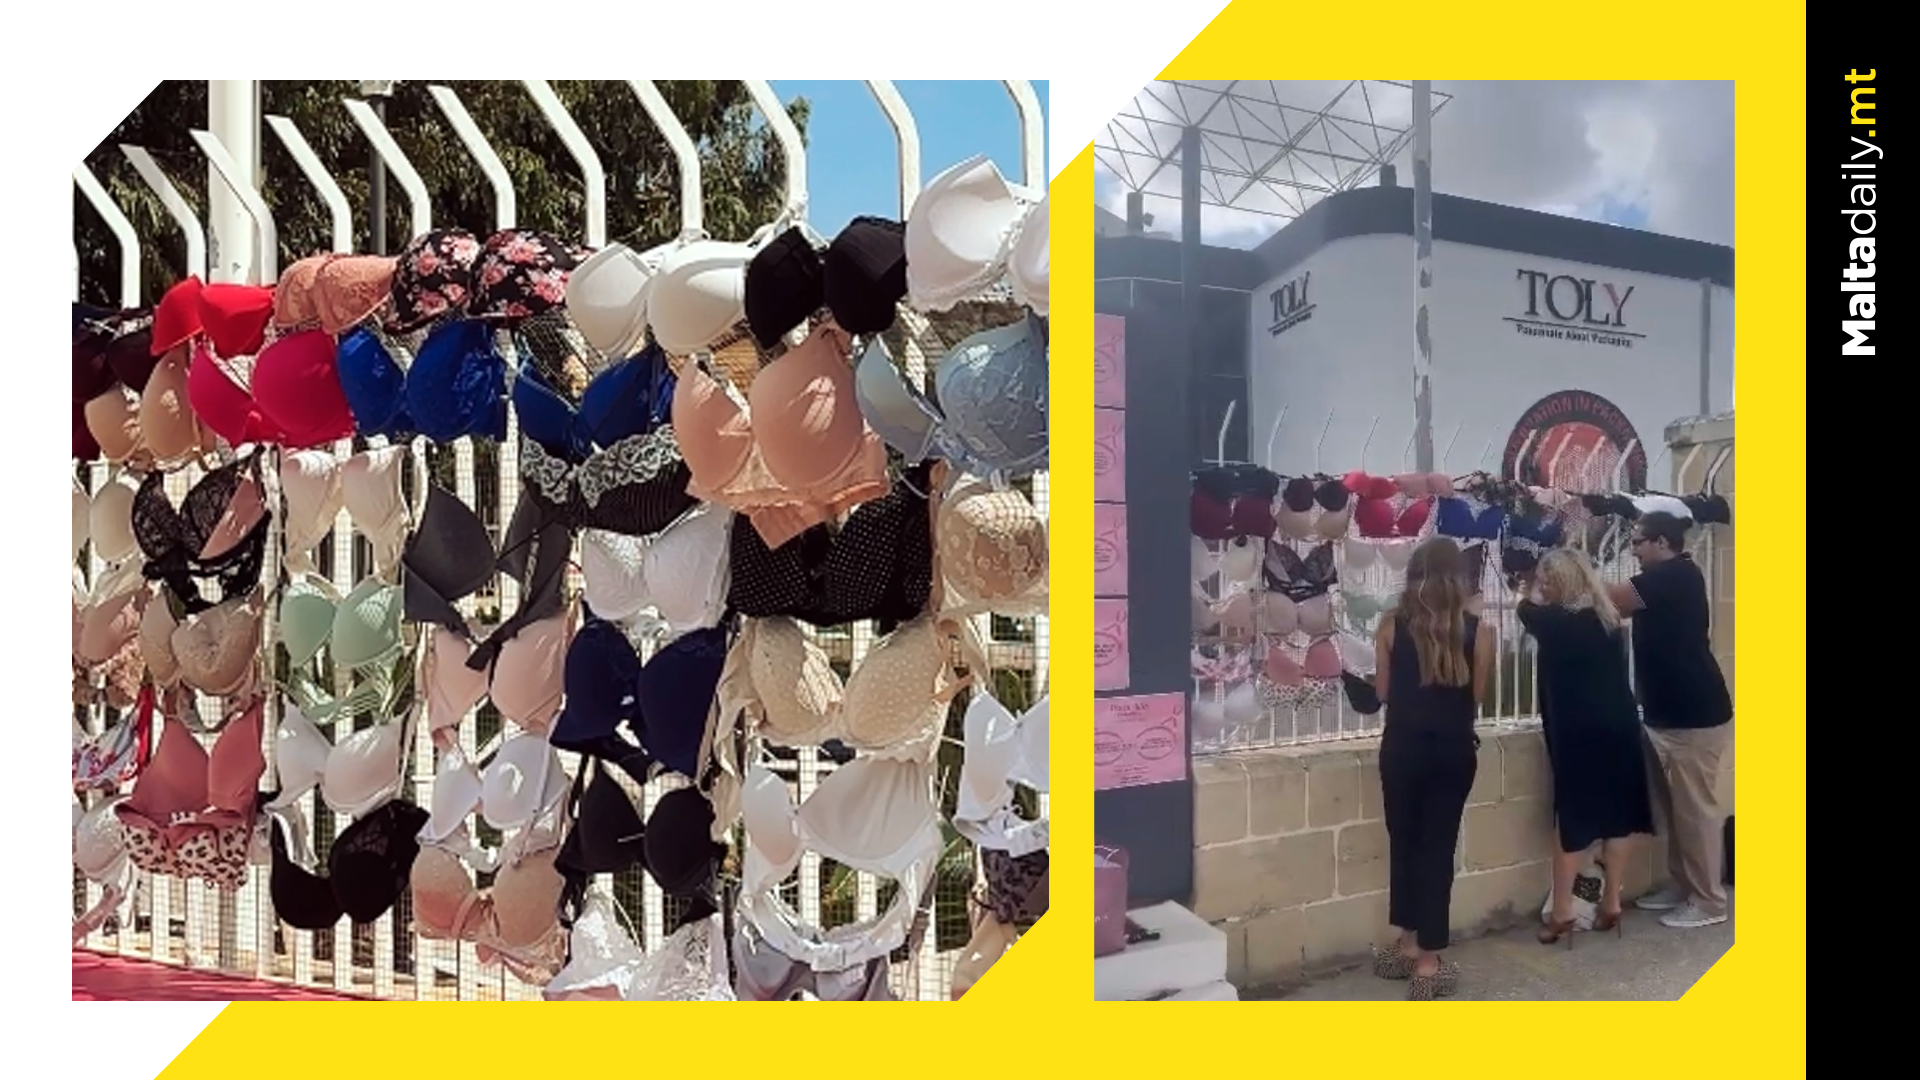 Toly Hang Bras From Factory Gate For Breast Cancer Awareness